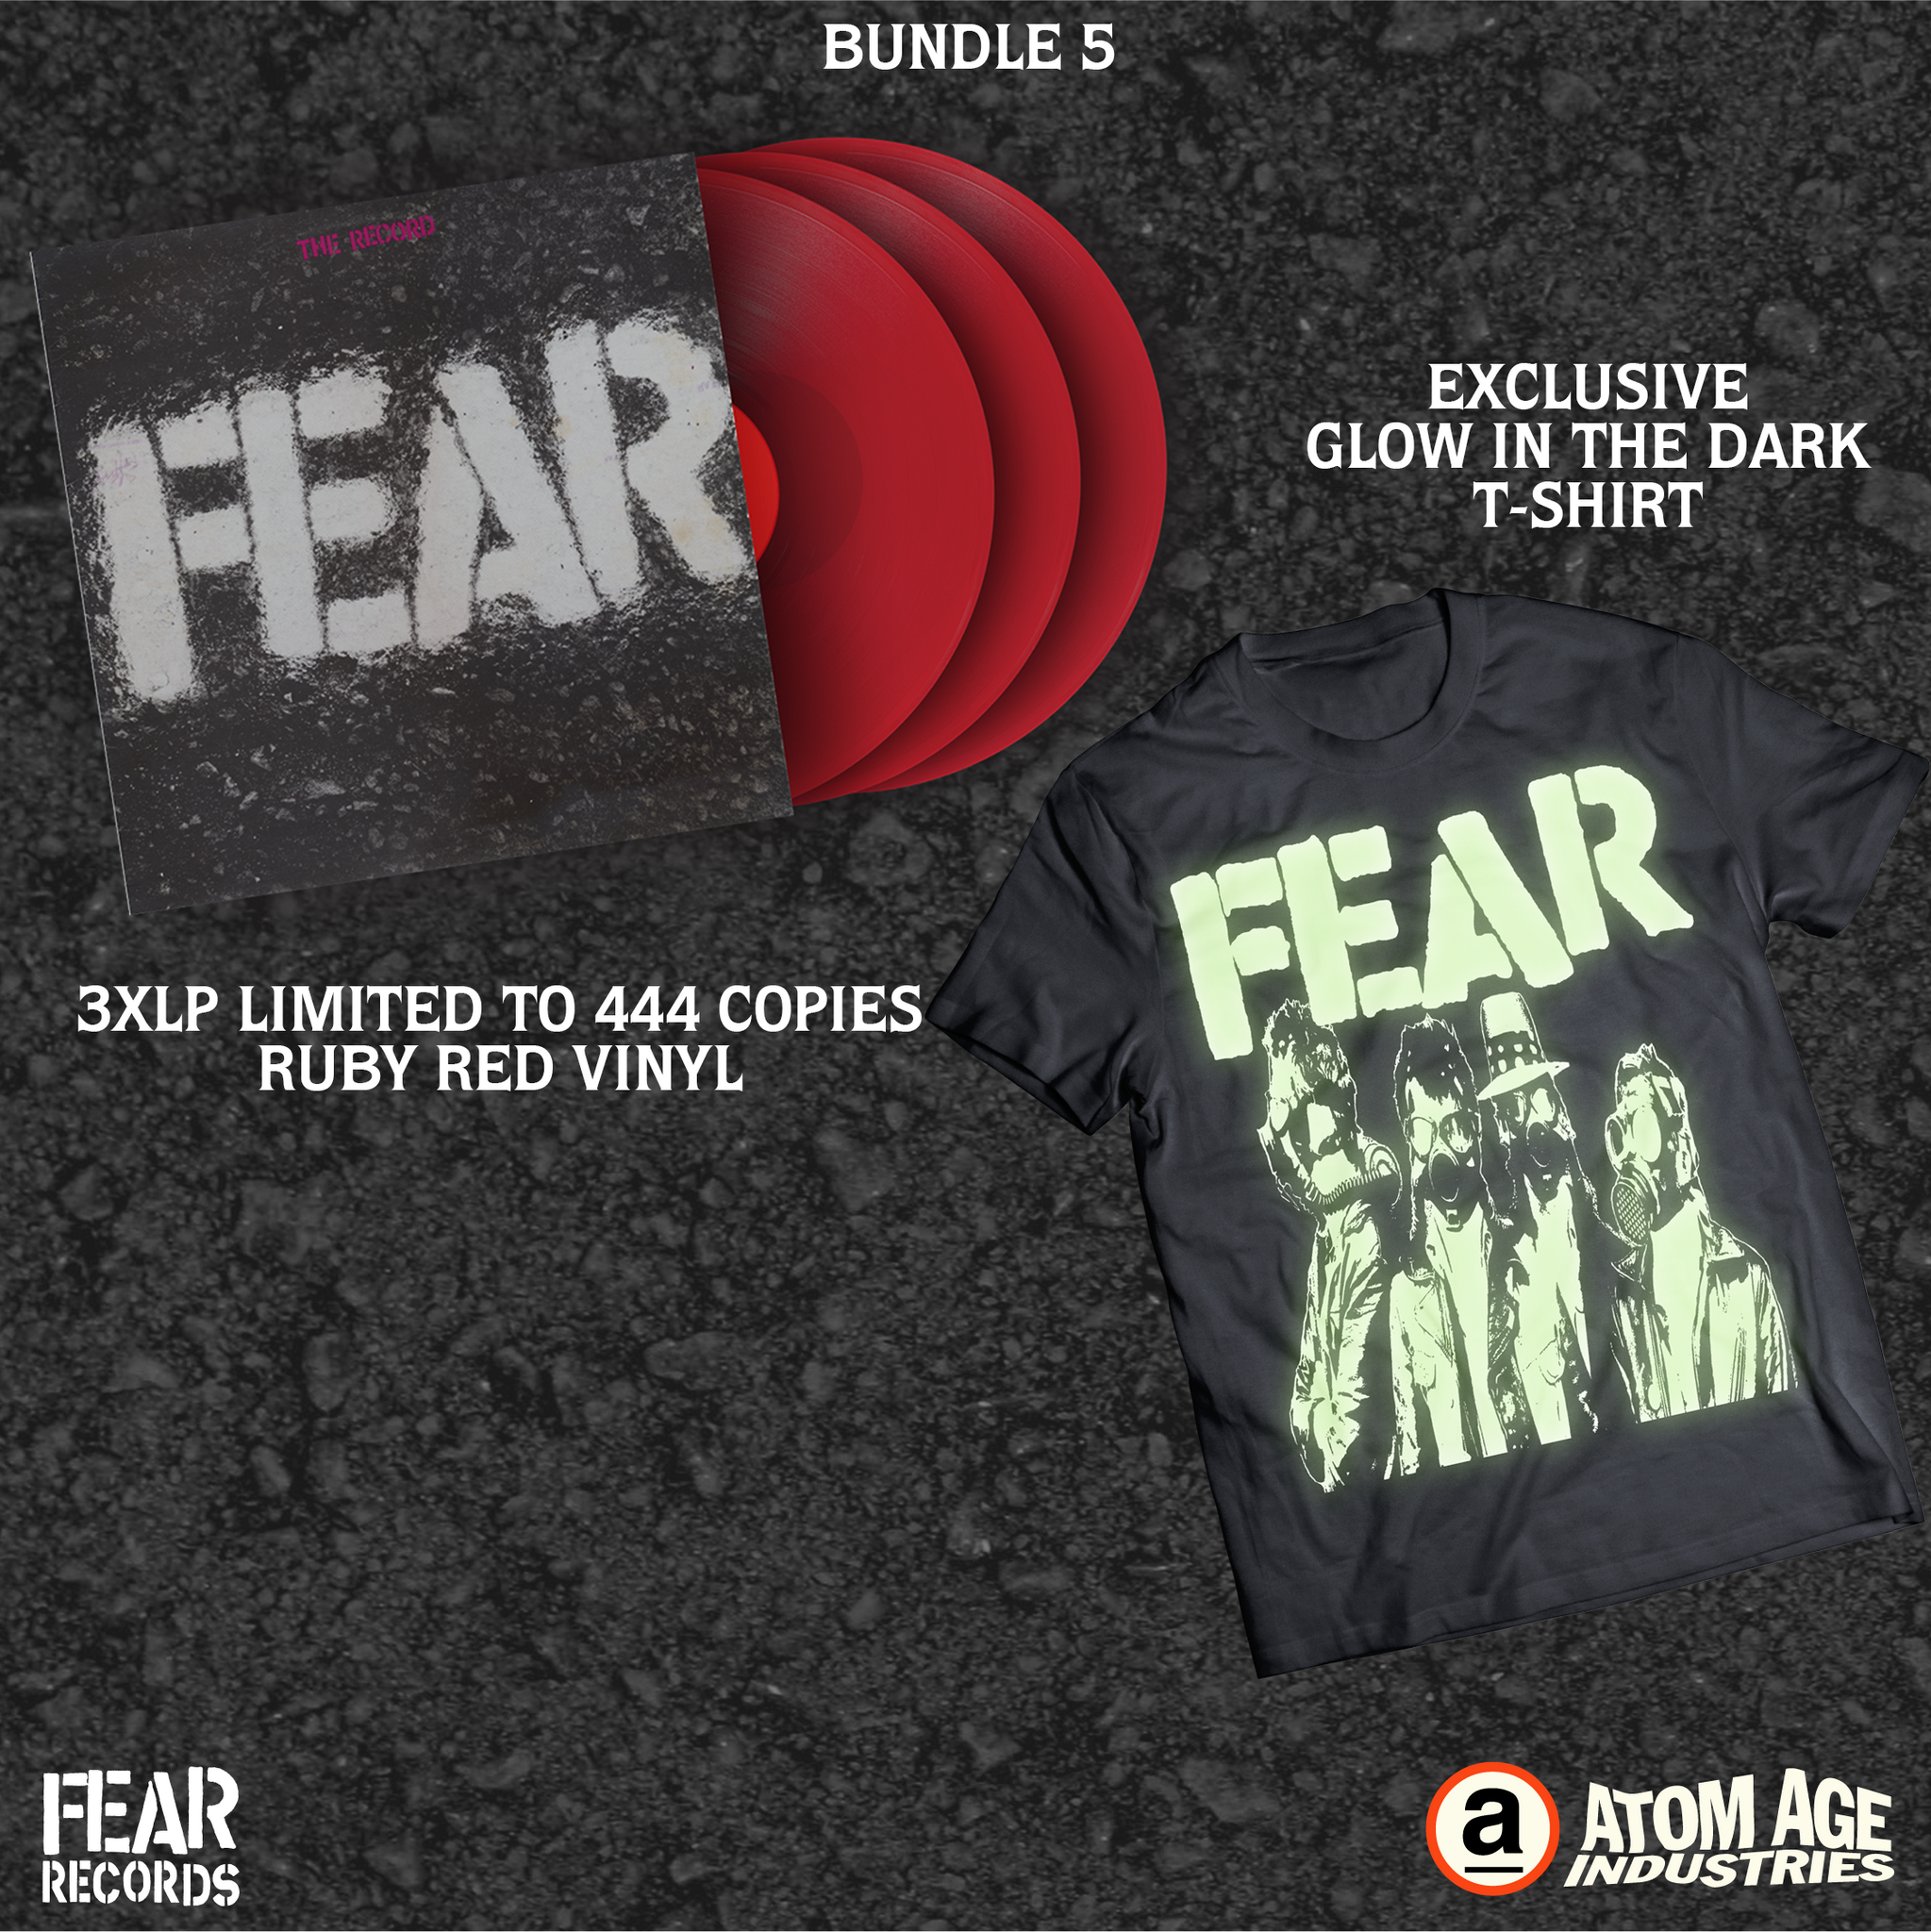 FEAR:  "FEAR THE RECORD" LIMITED EDITION 3LP RED VINYL SET BUNDLE 5 ***PREORDER- ORDERS CLOSED***